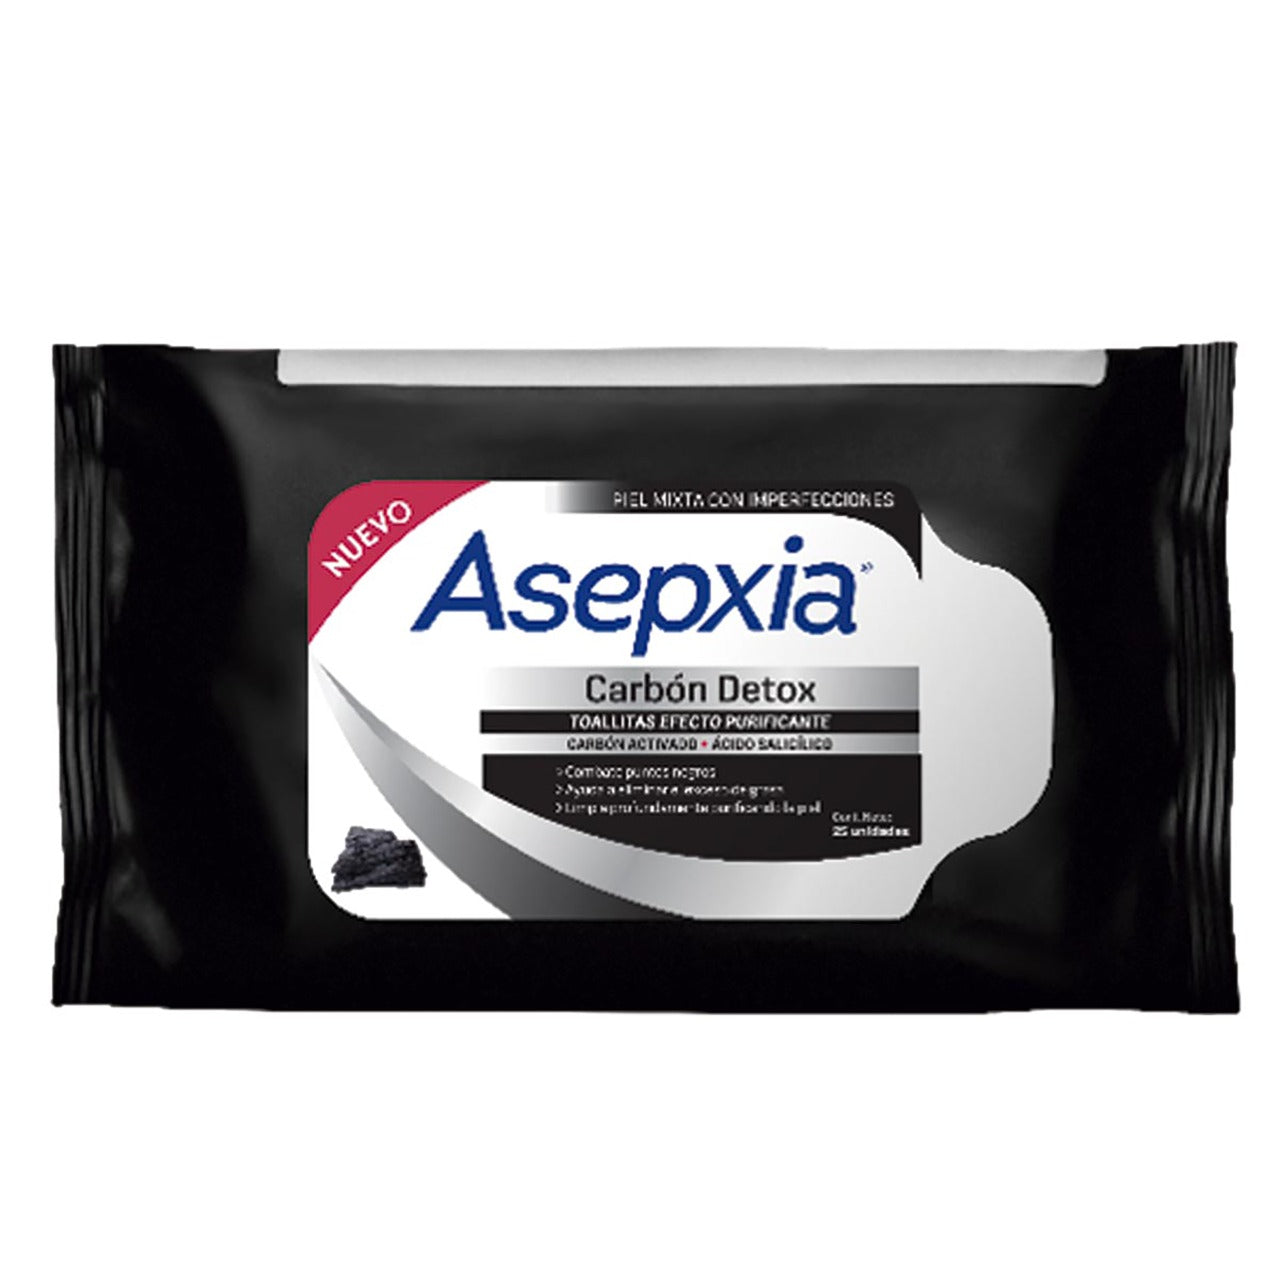 ASEPXIA TOALLITAS CARBON 25 UDS